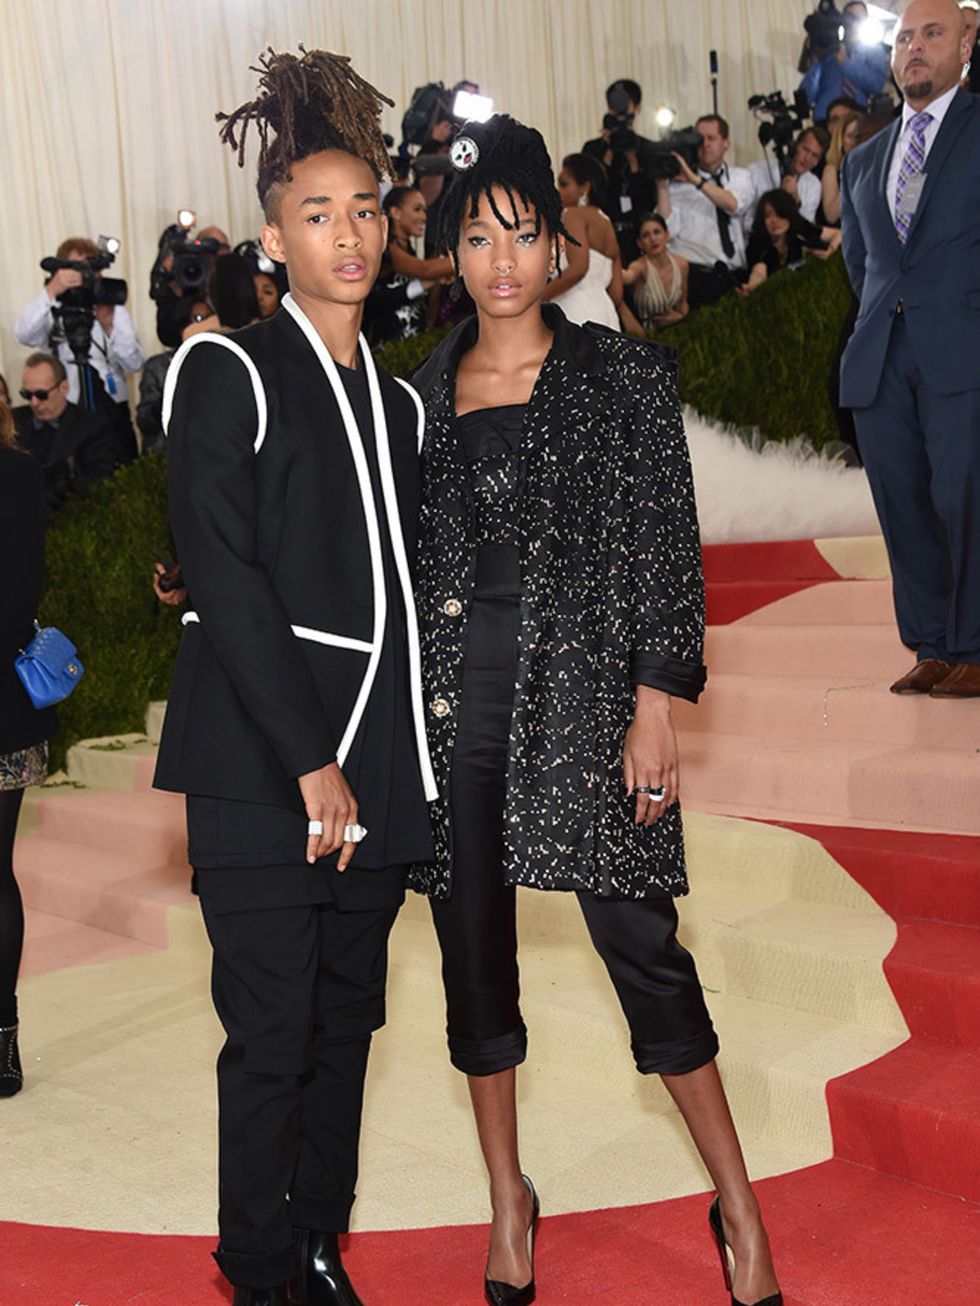 Jaden and Willow Smith at the Met Gala in New York, May 2016.